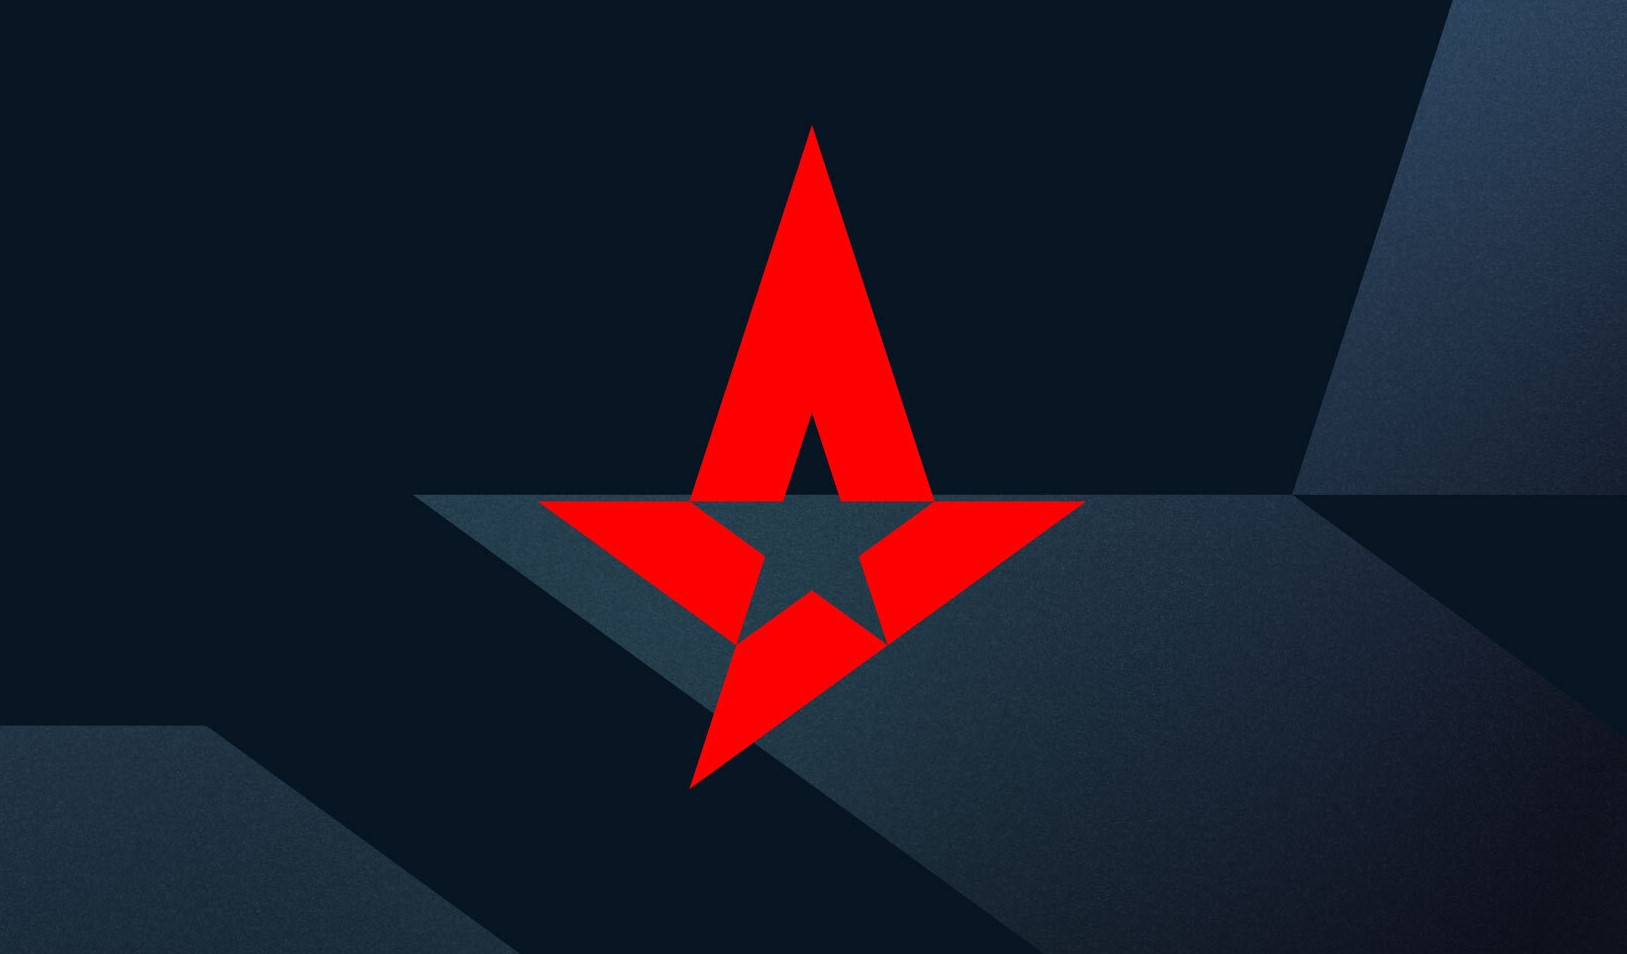 Astralis unify brand by renaming Origen LEC and FIFA teams